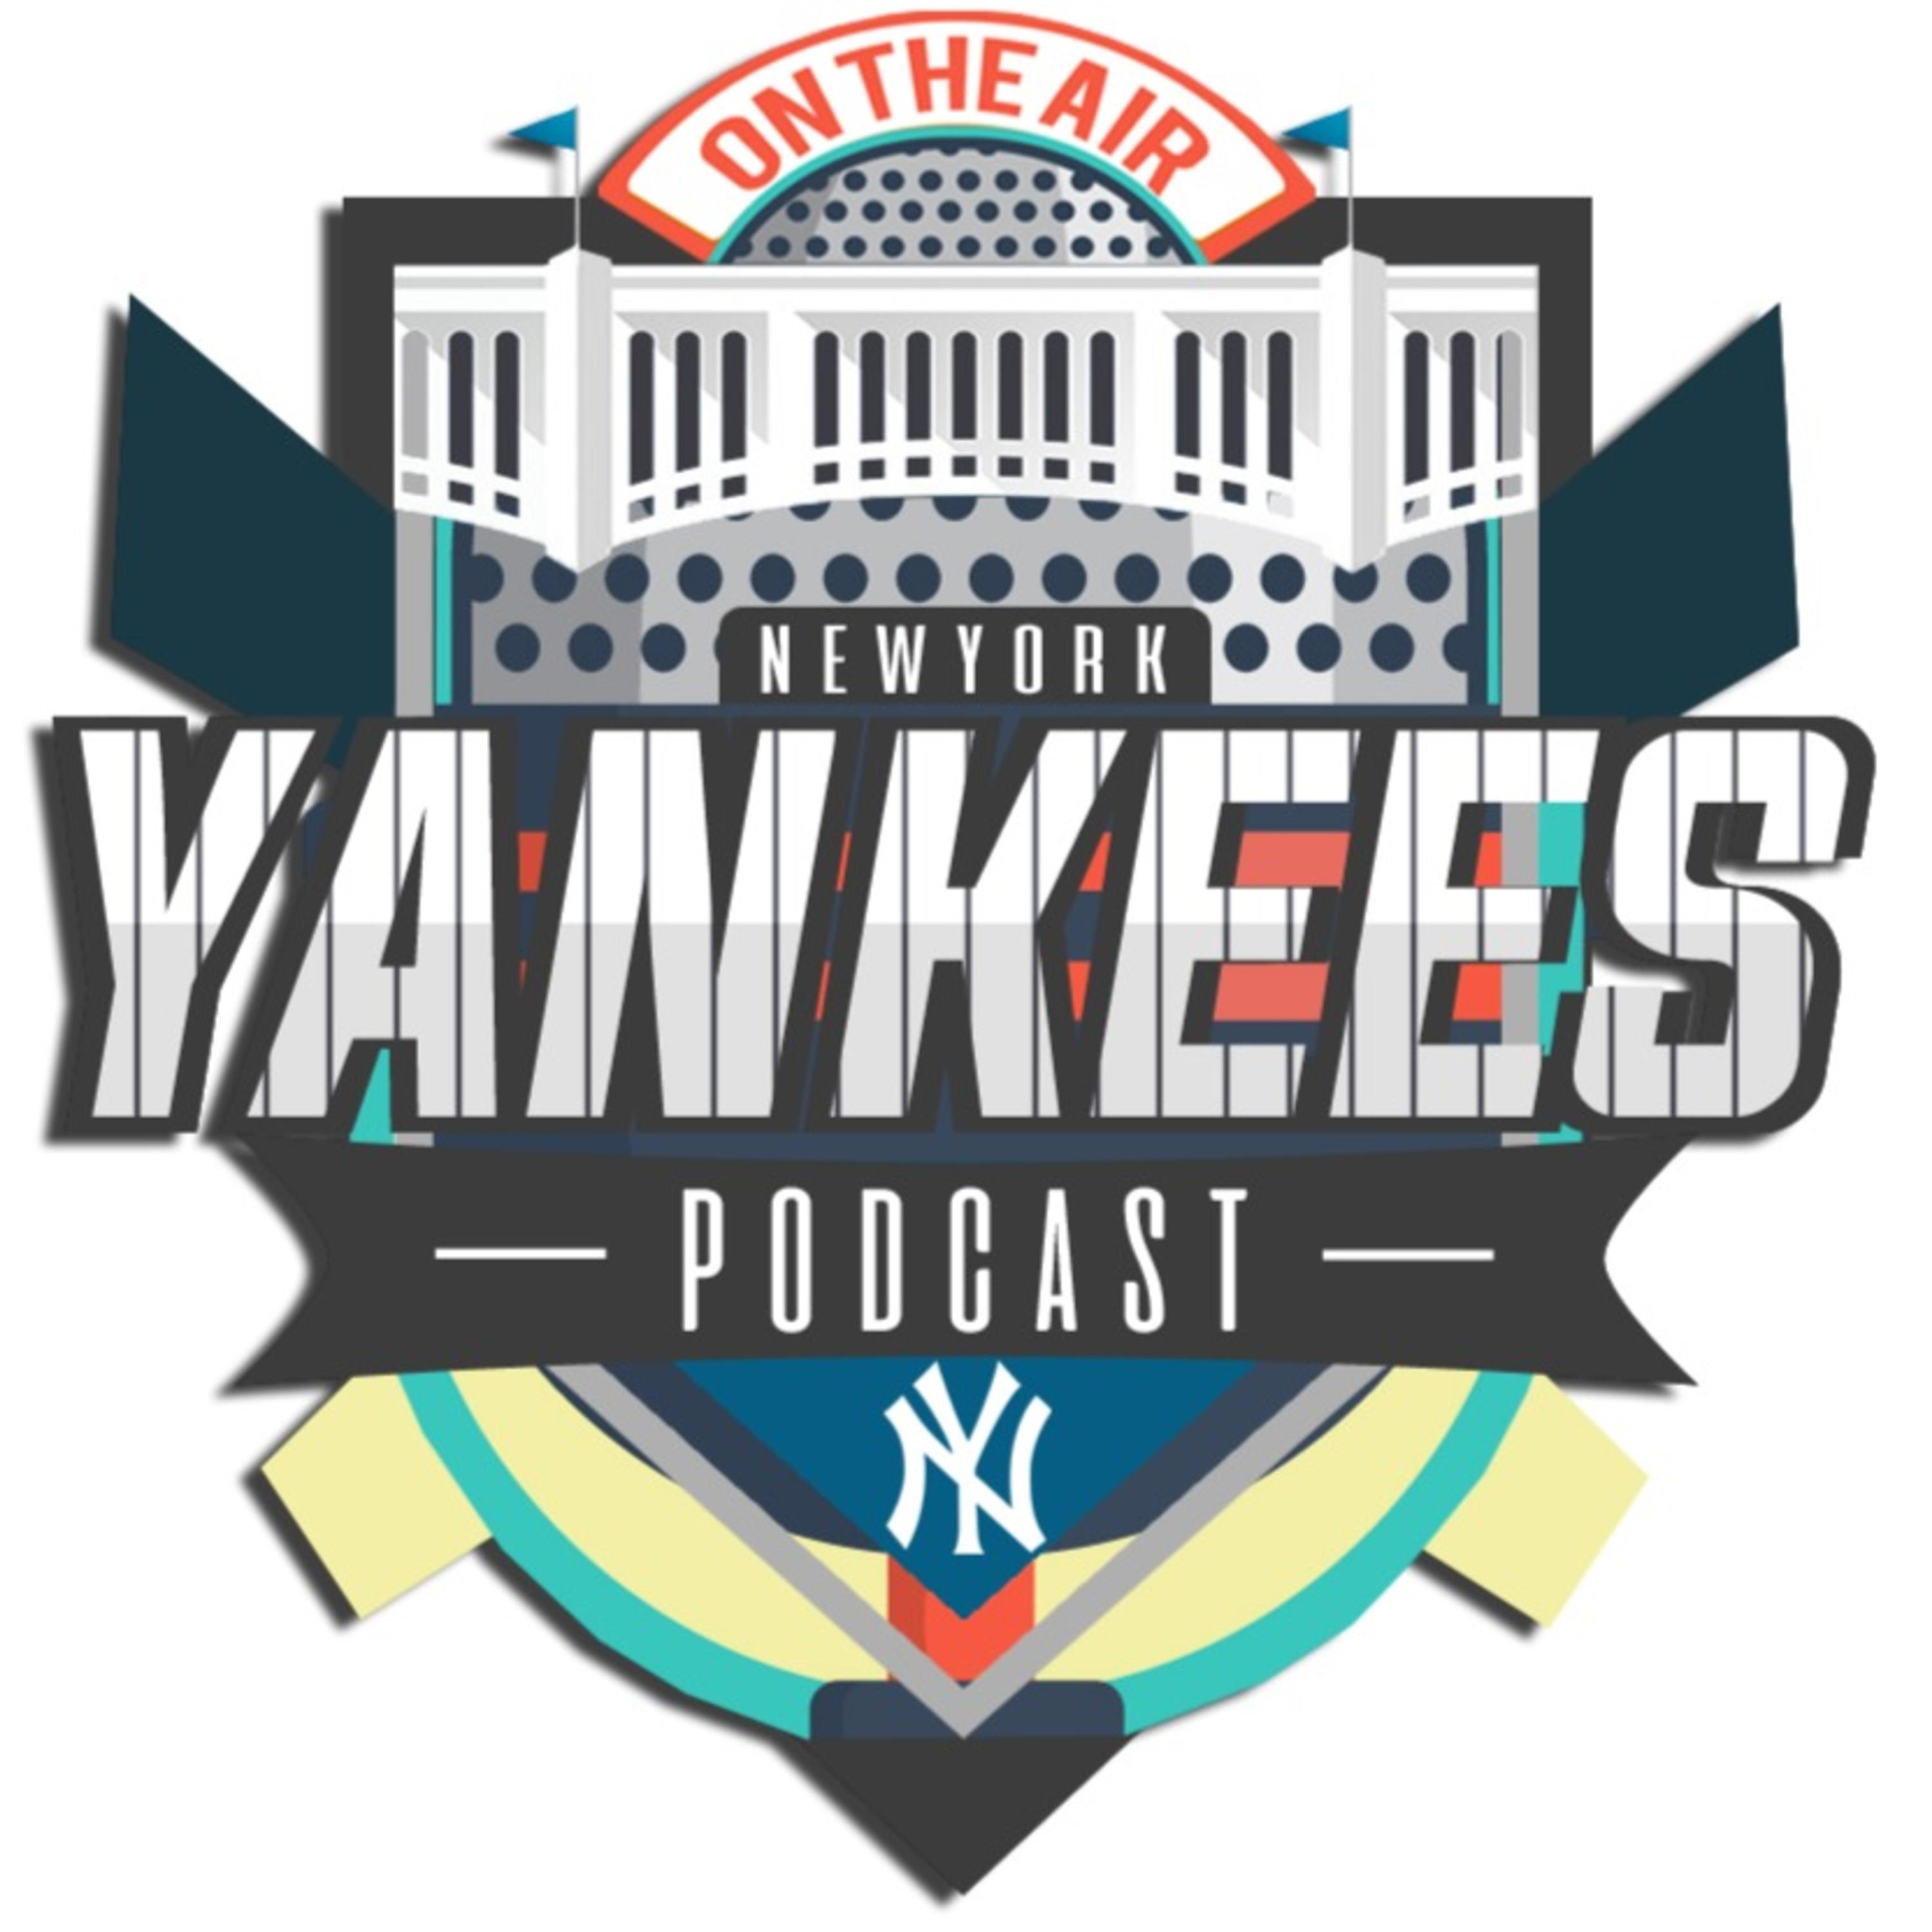 New York Yankees Hungary Podcast - Bé x DS! x Mike - Episode 14